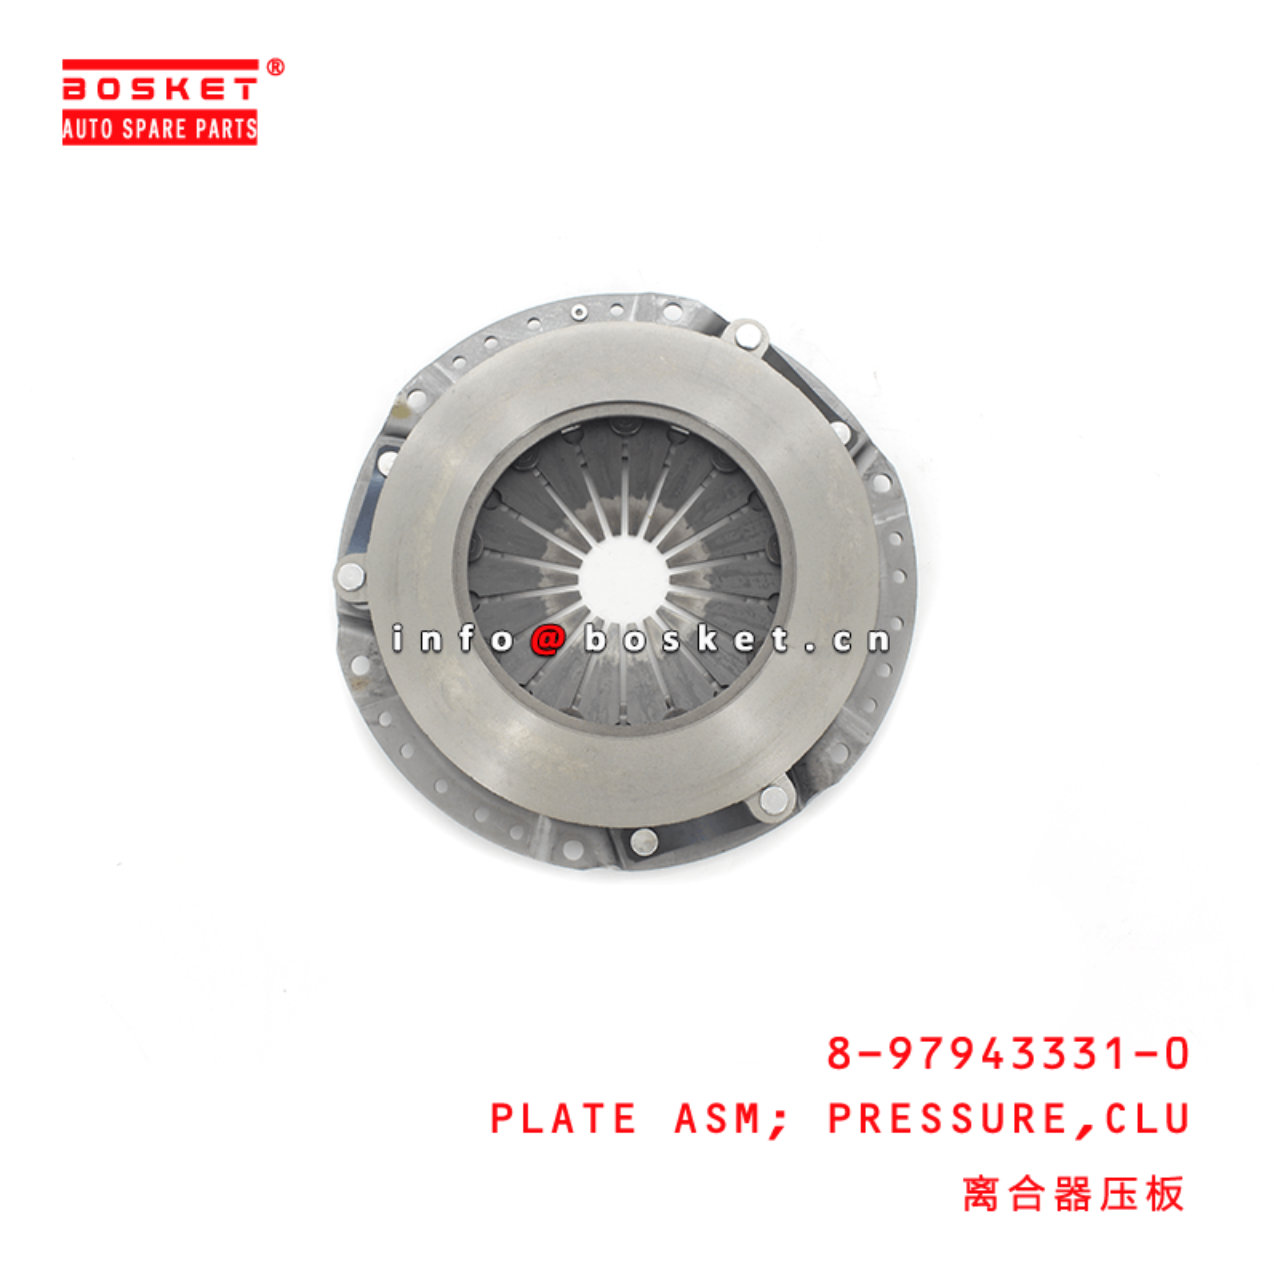 8-97943331-0 Clutch Pressure Plate Assembly 8979433310 Suitable for ISUZU D-MAX 4JA1